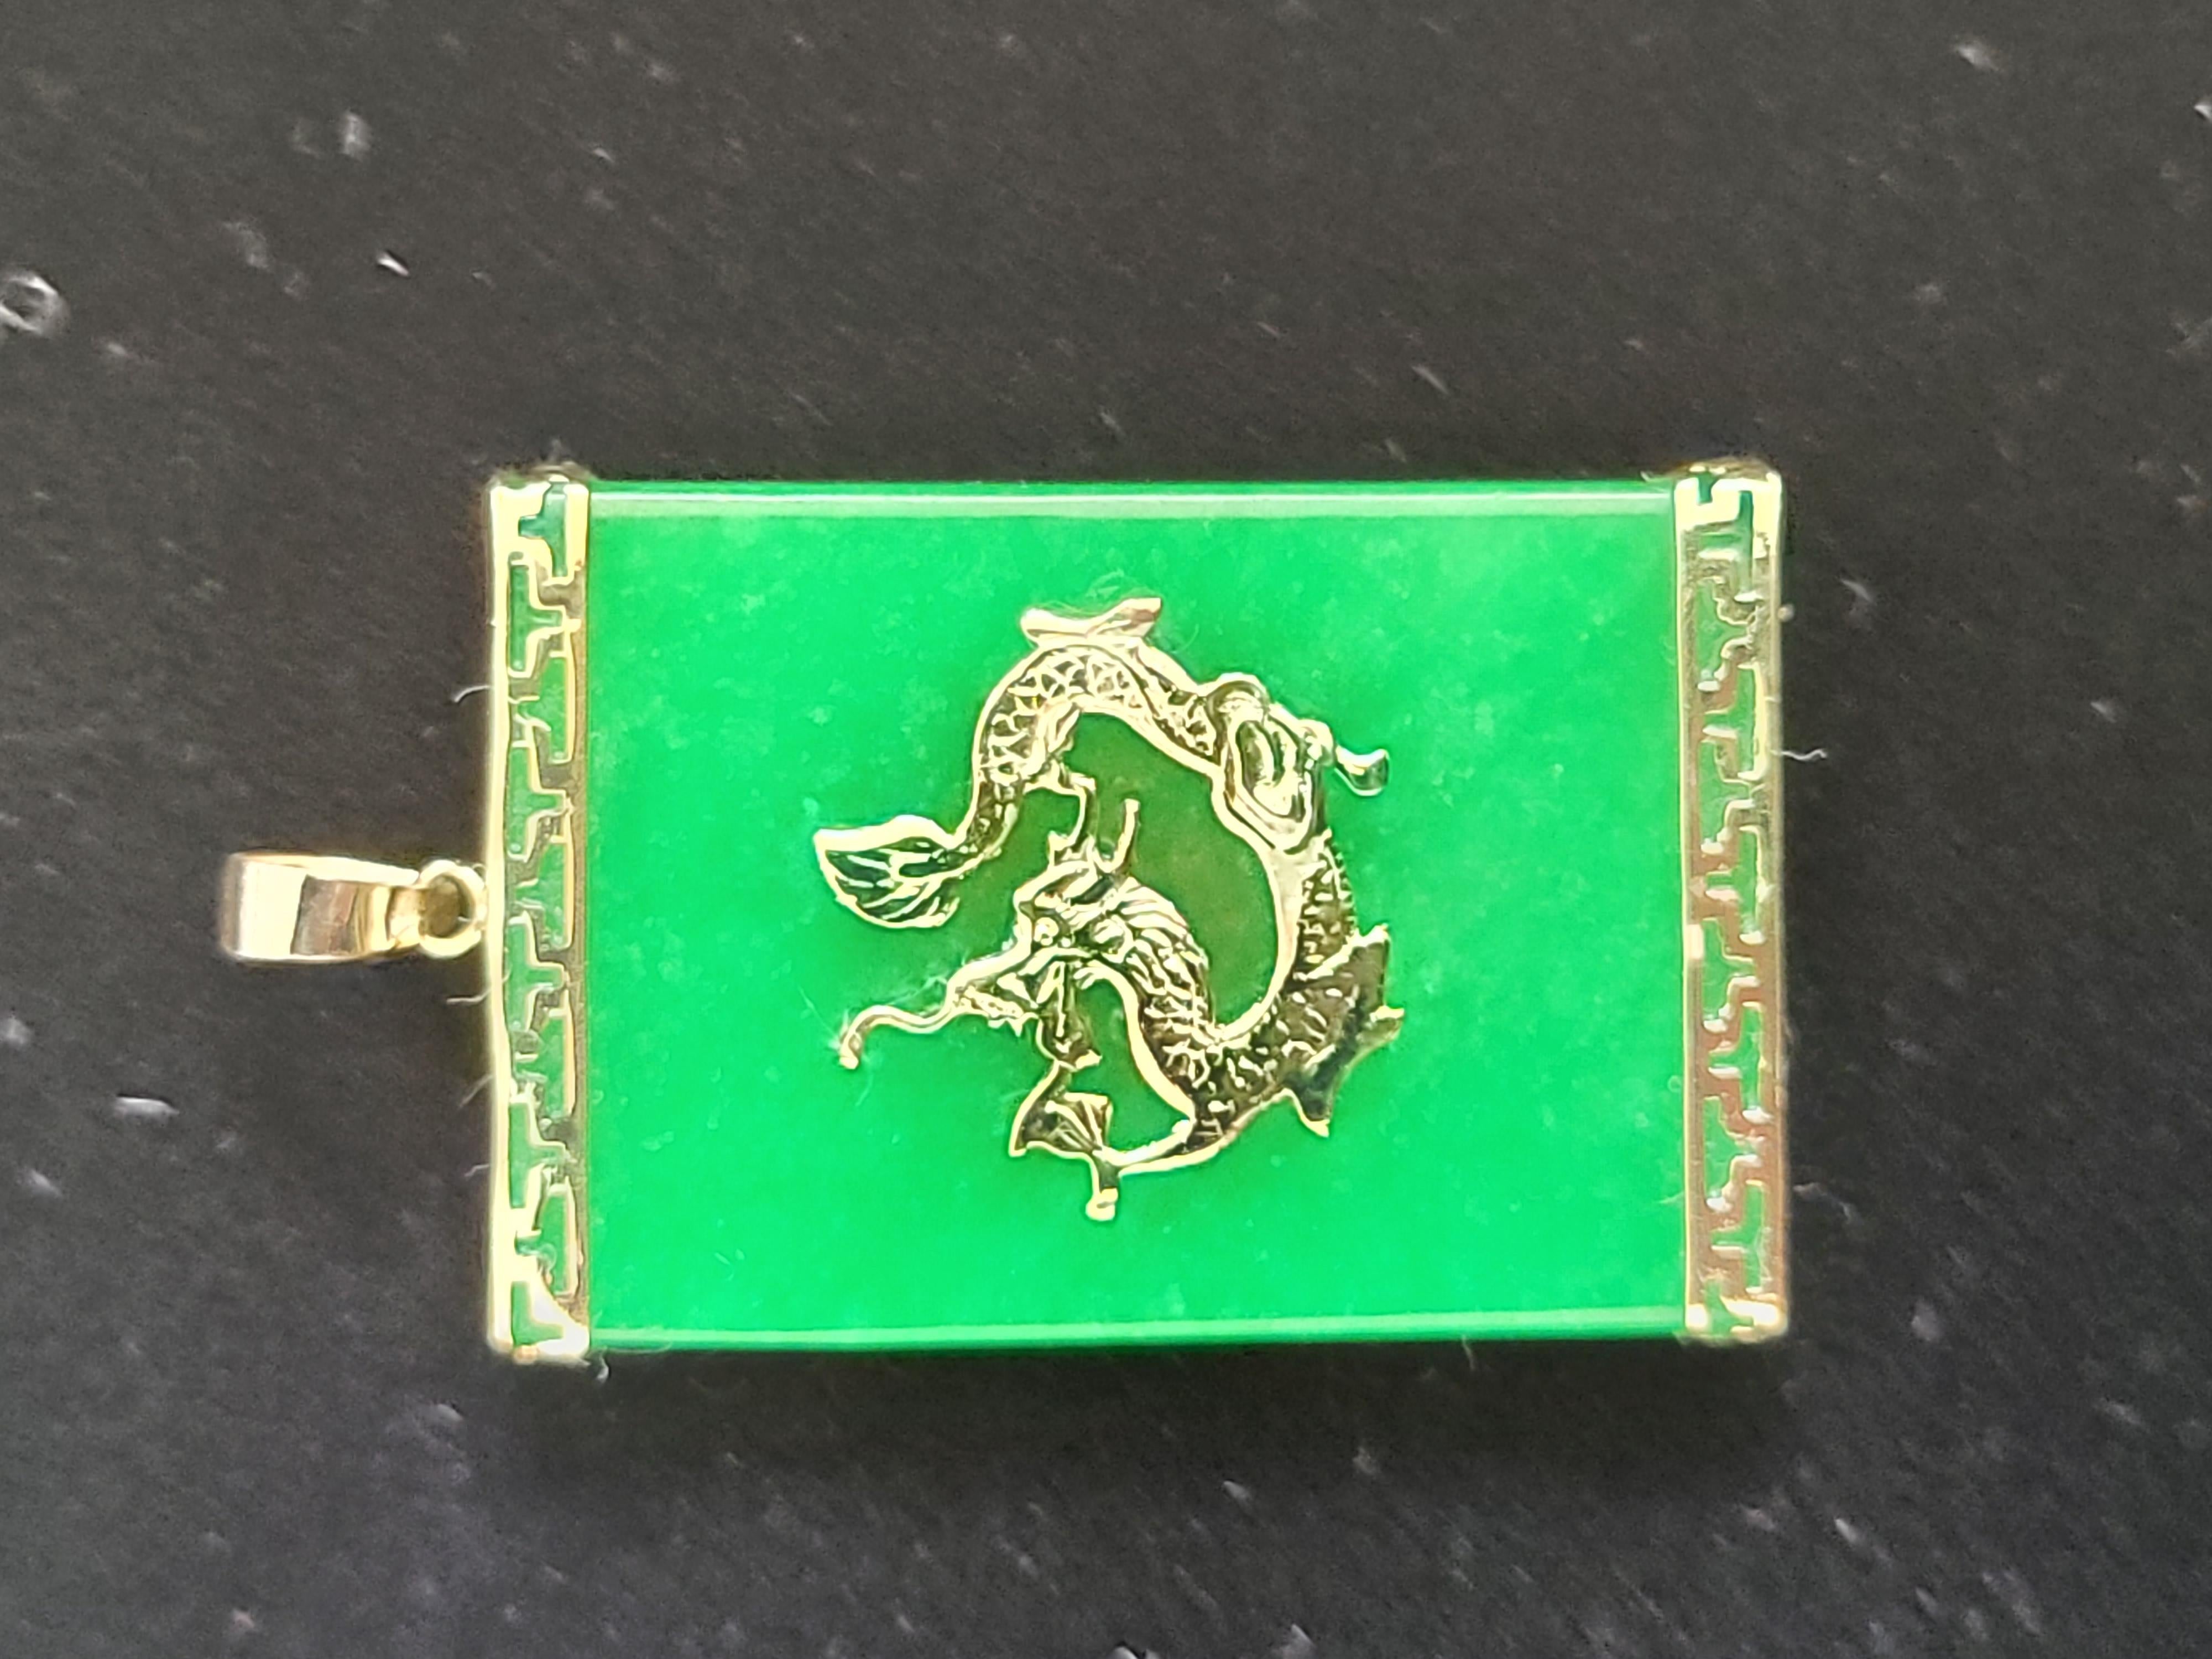 Symbolizing generosity, the Tai Locket Jade Dragon Pendant represents traditional sharing of wealth during Chinese New Year with the power of the Dragon. The generous proportions depict wealth and boldness.

Made out of Jadeite, with a solid 14K